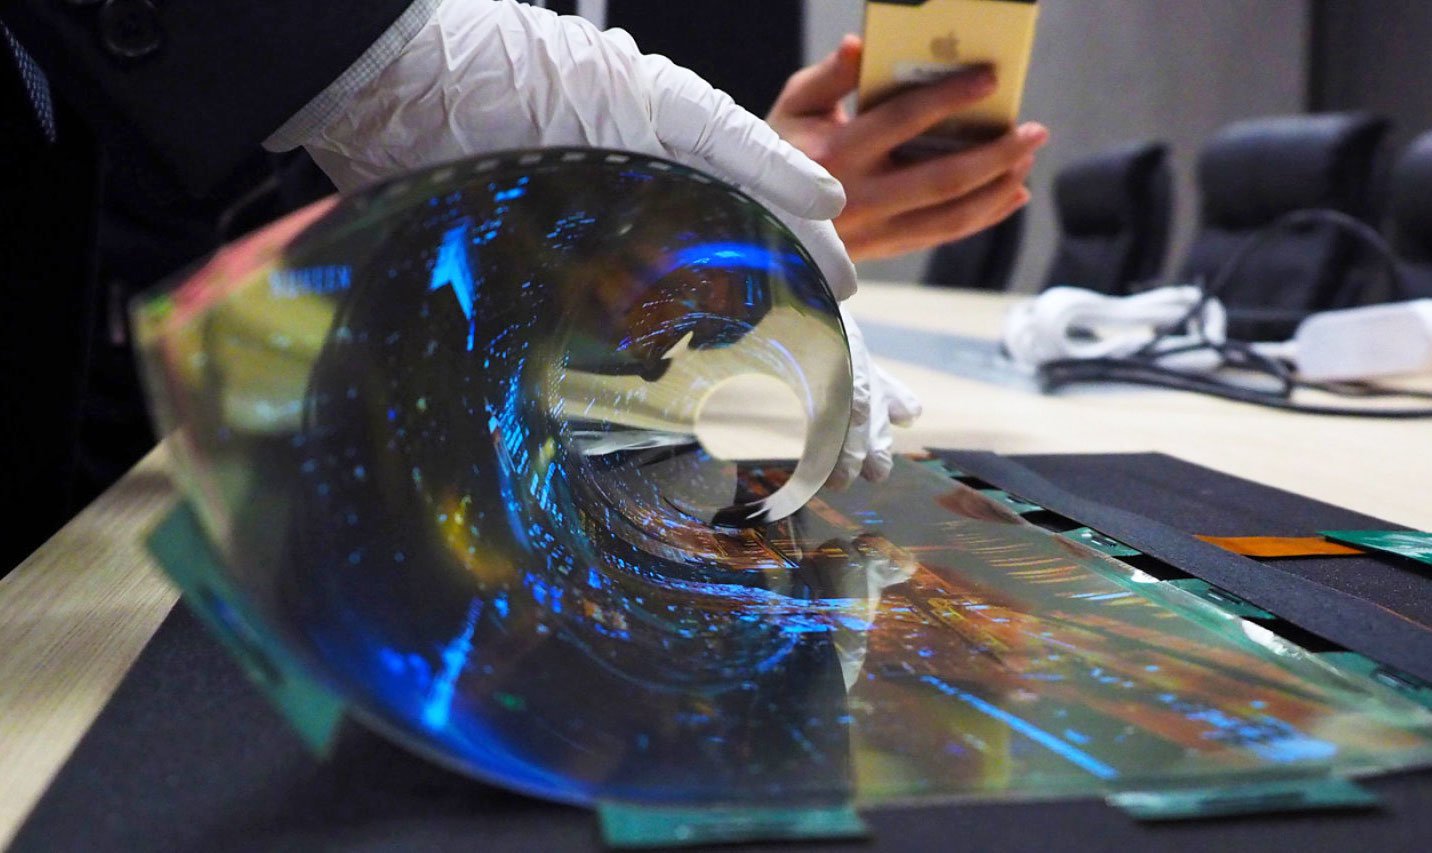 Flexible and ultra thin screens